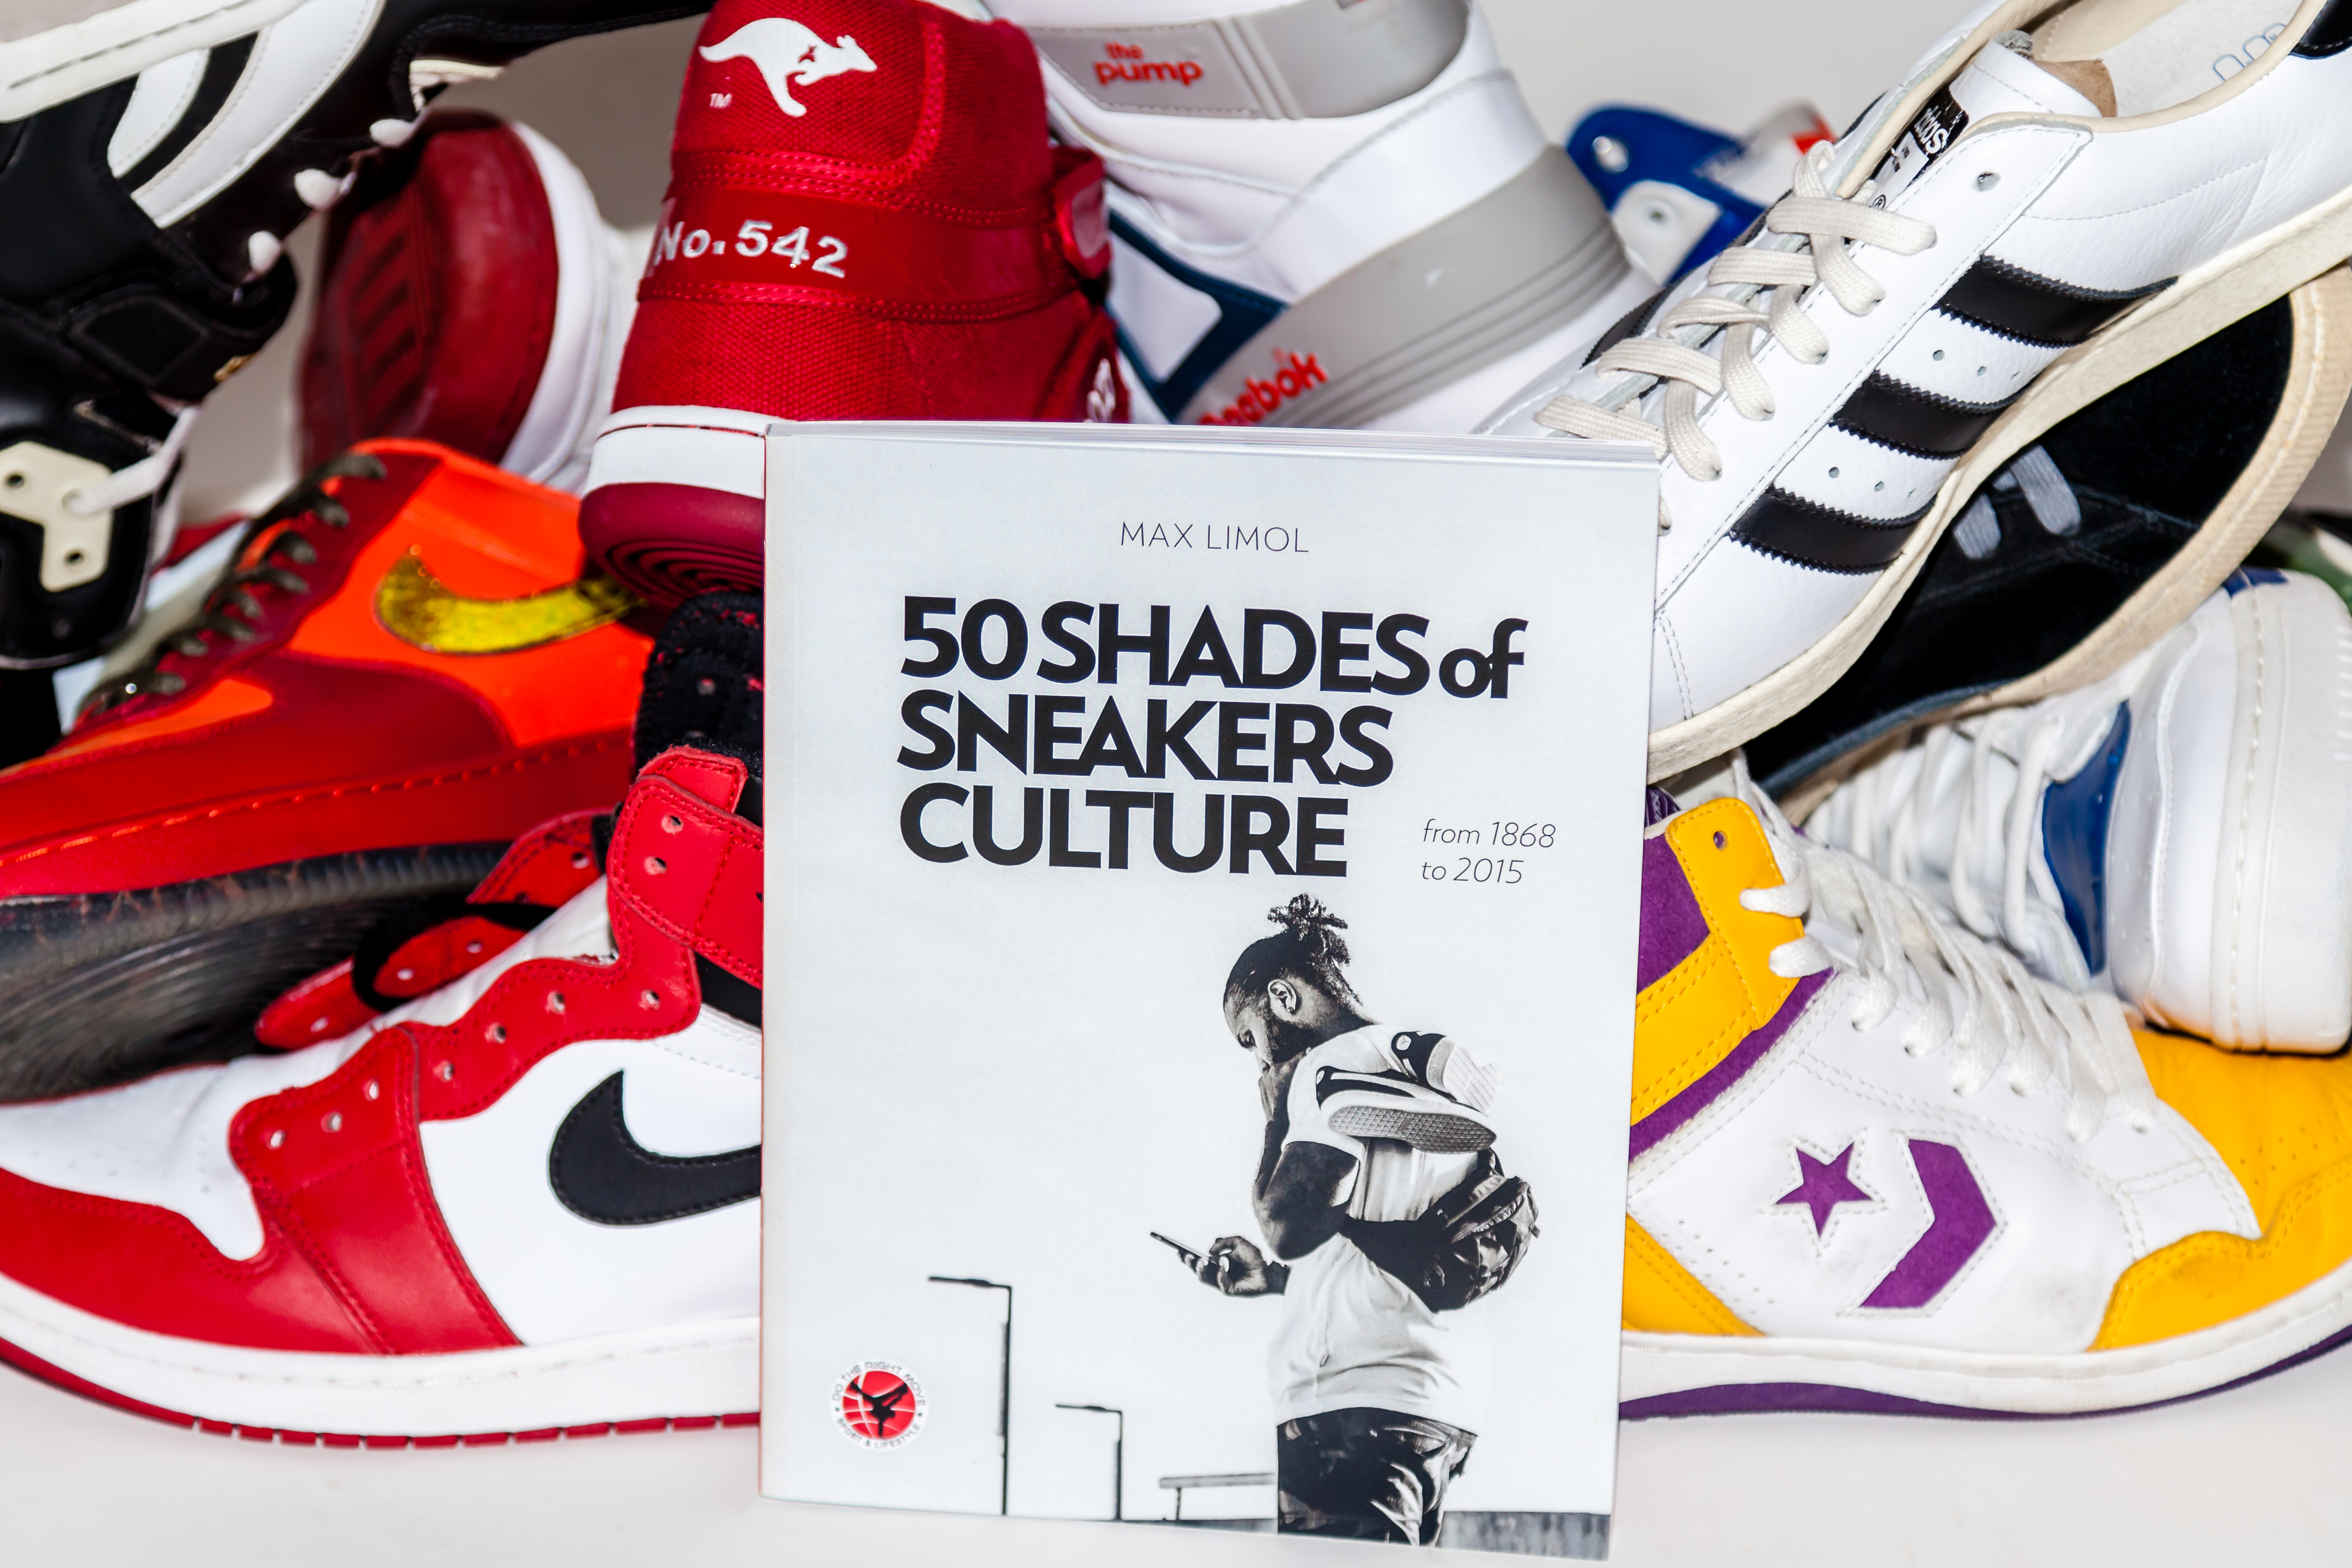 PUBLICATION-Edition] “50 shades of sneakers culture” – LudoPhotography